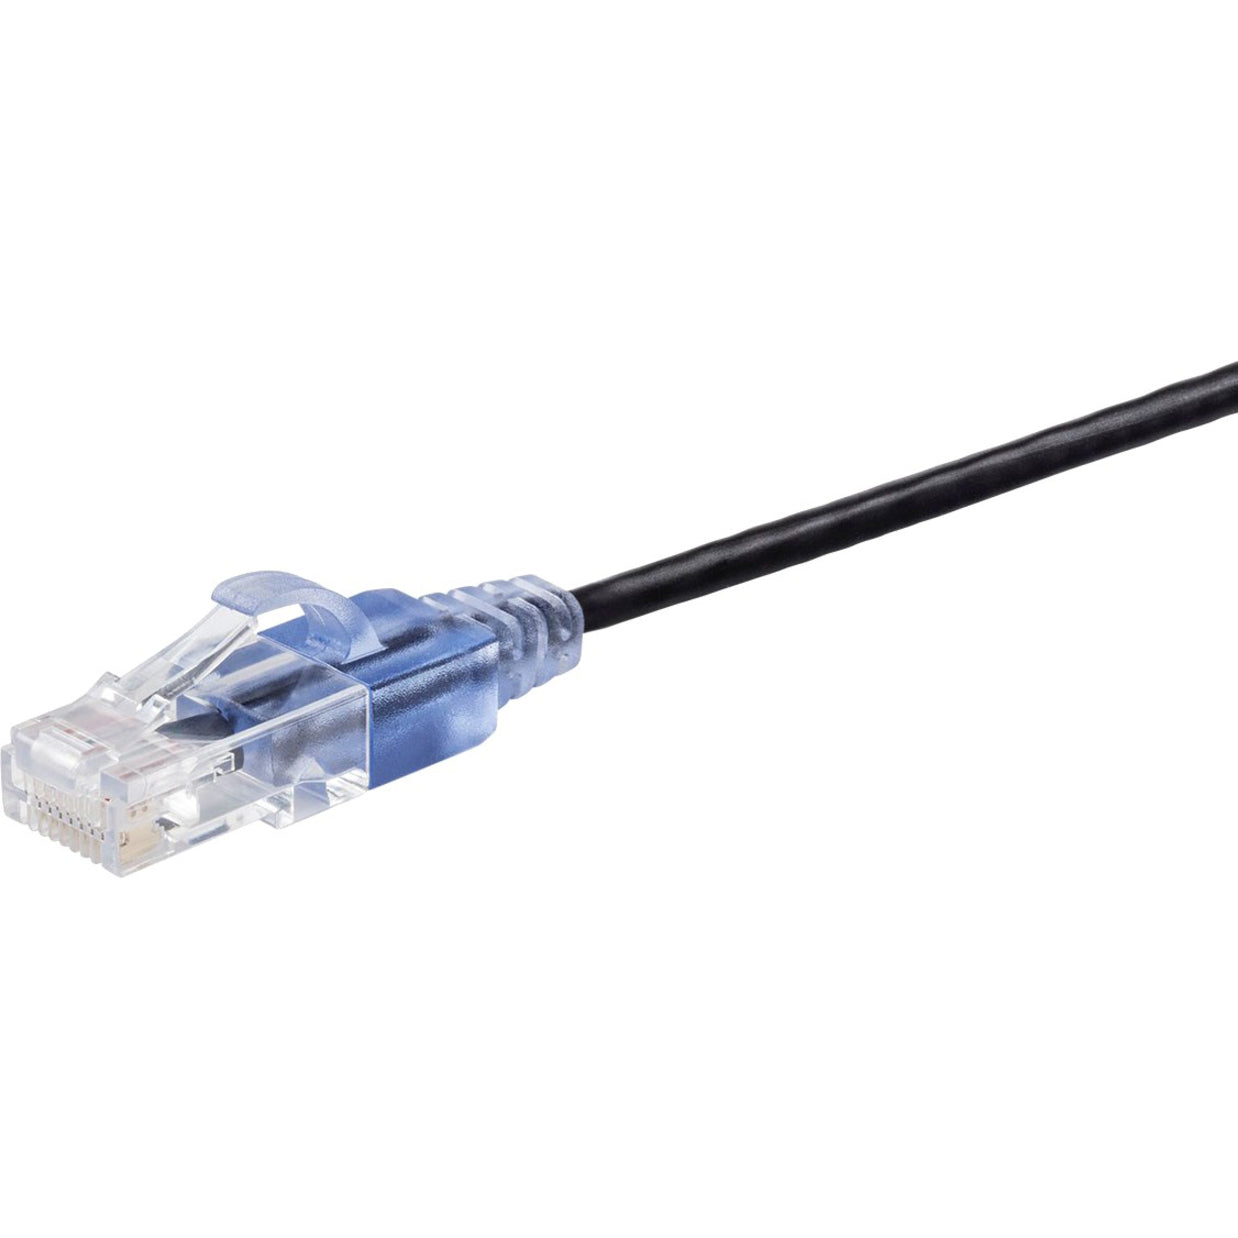 Monoprice 15157 SlimRun Cat6A Ethernet Network Patch Cable 10-Pack, 5ft Black